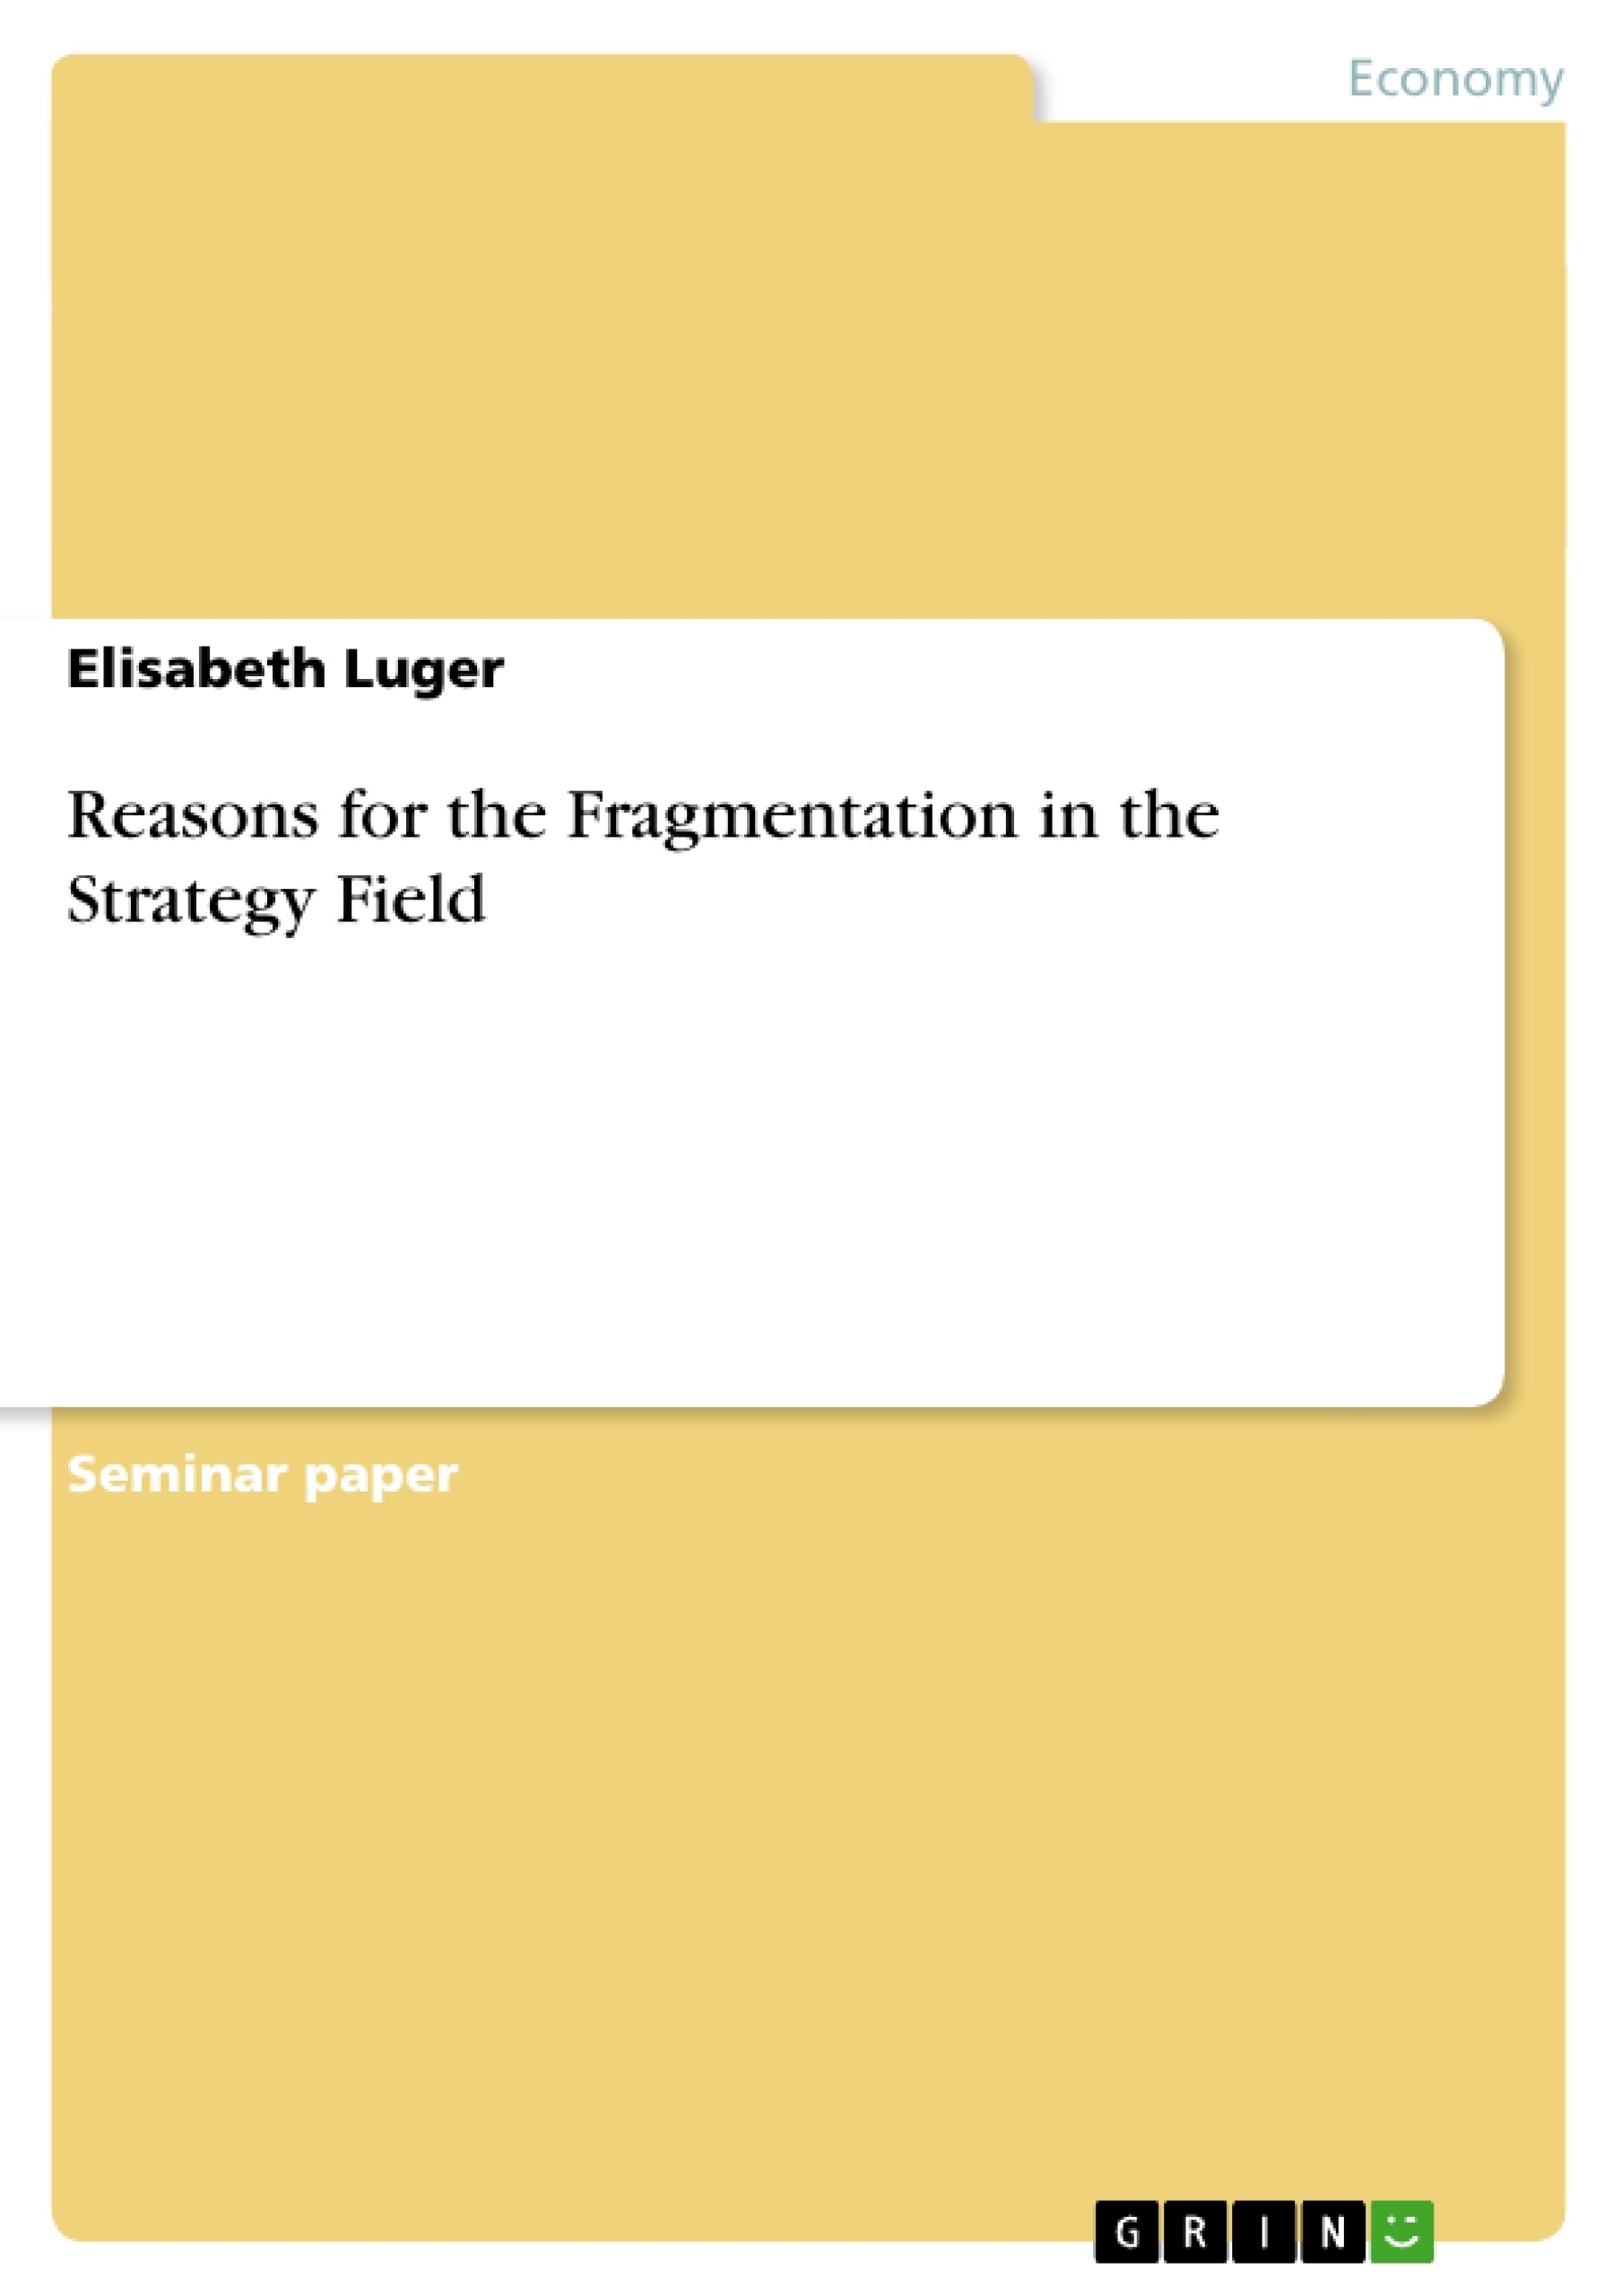 Title: Reasons for the Fragmentation in the Strategy Field